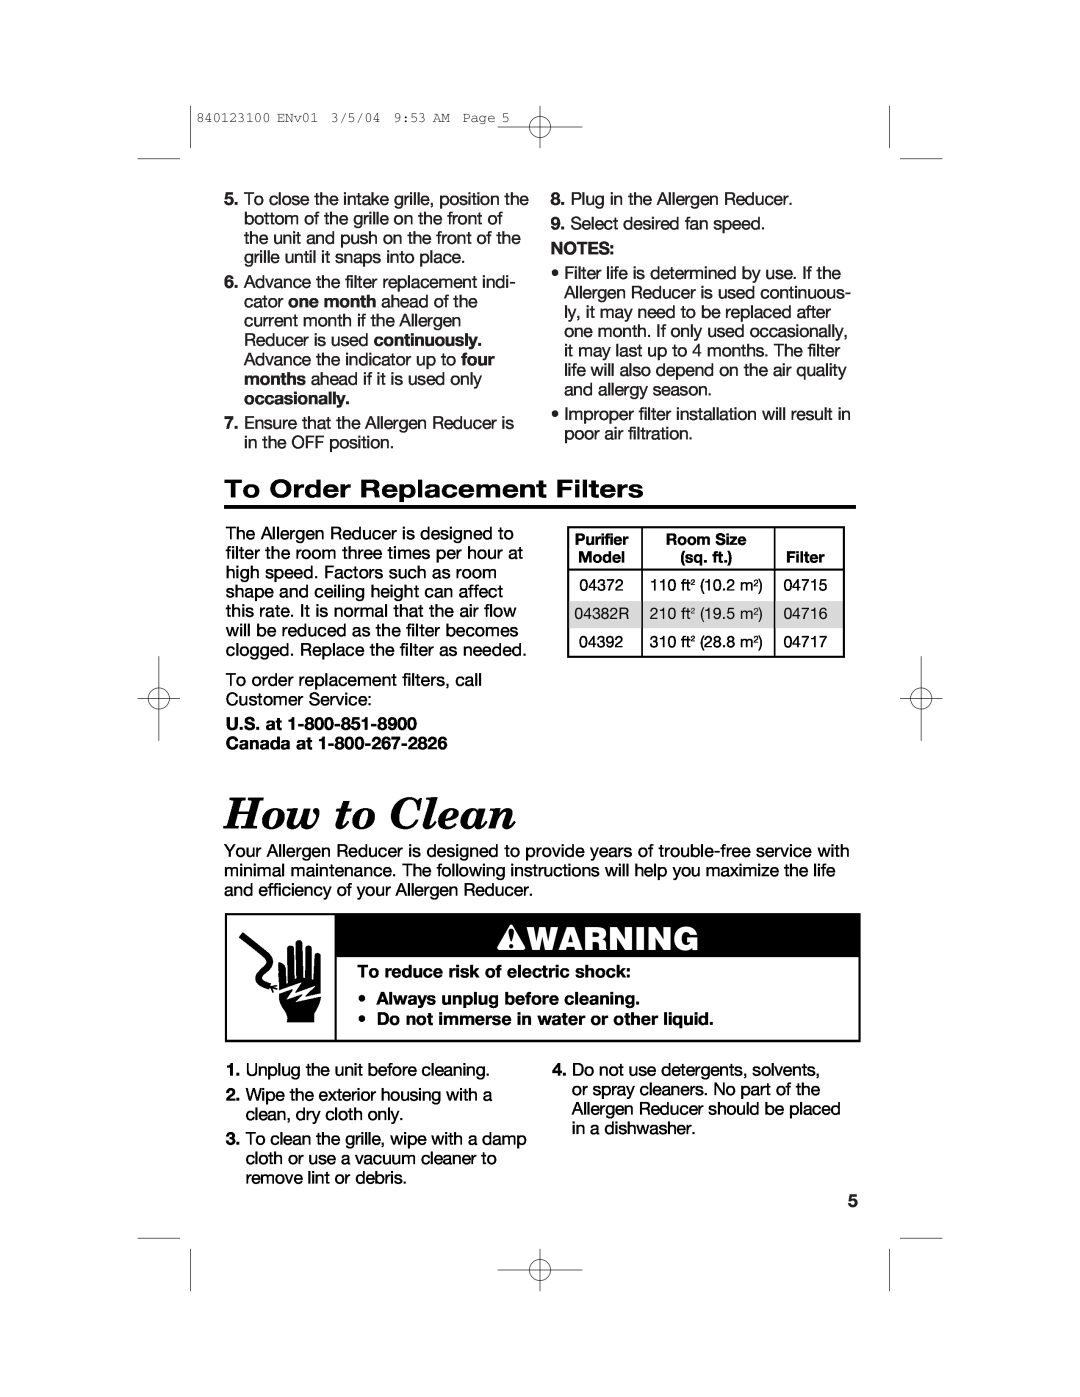 Hamilton Beach 840123100 How to Clean, To Order Replacement Filters, U.S. at Canada at, To reduce risk of electric shock 